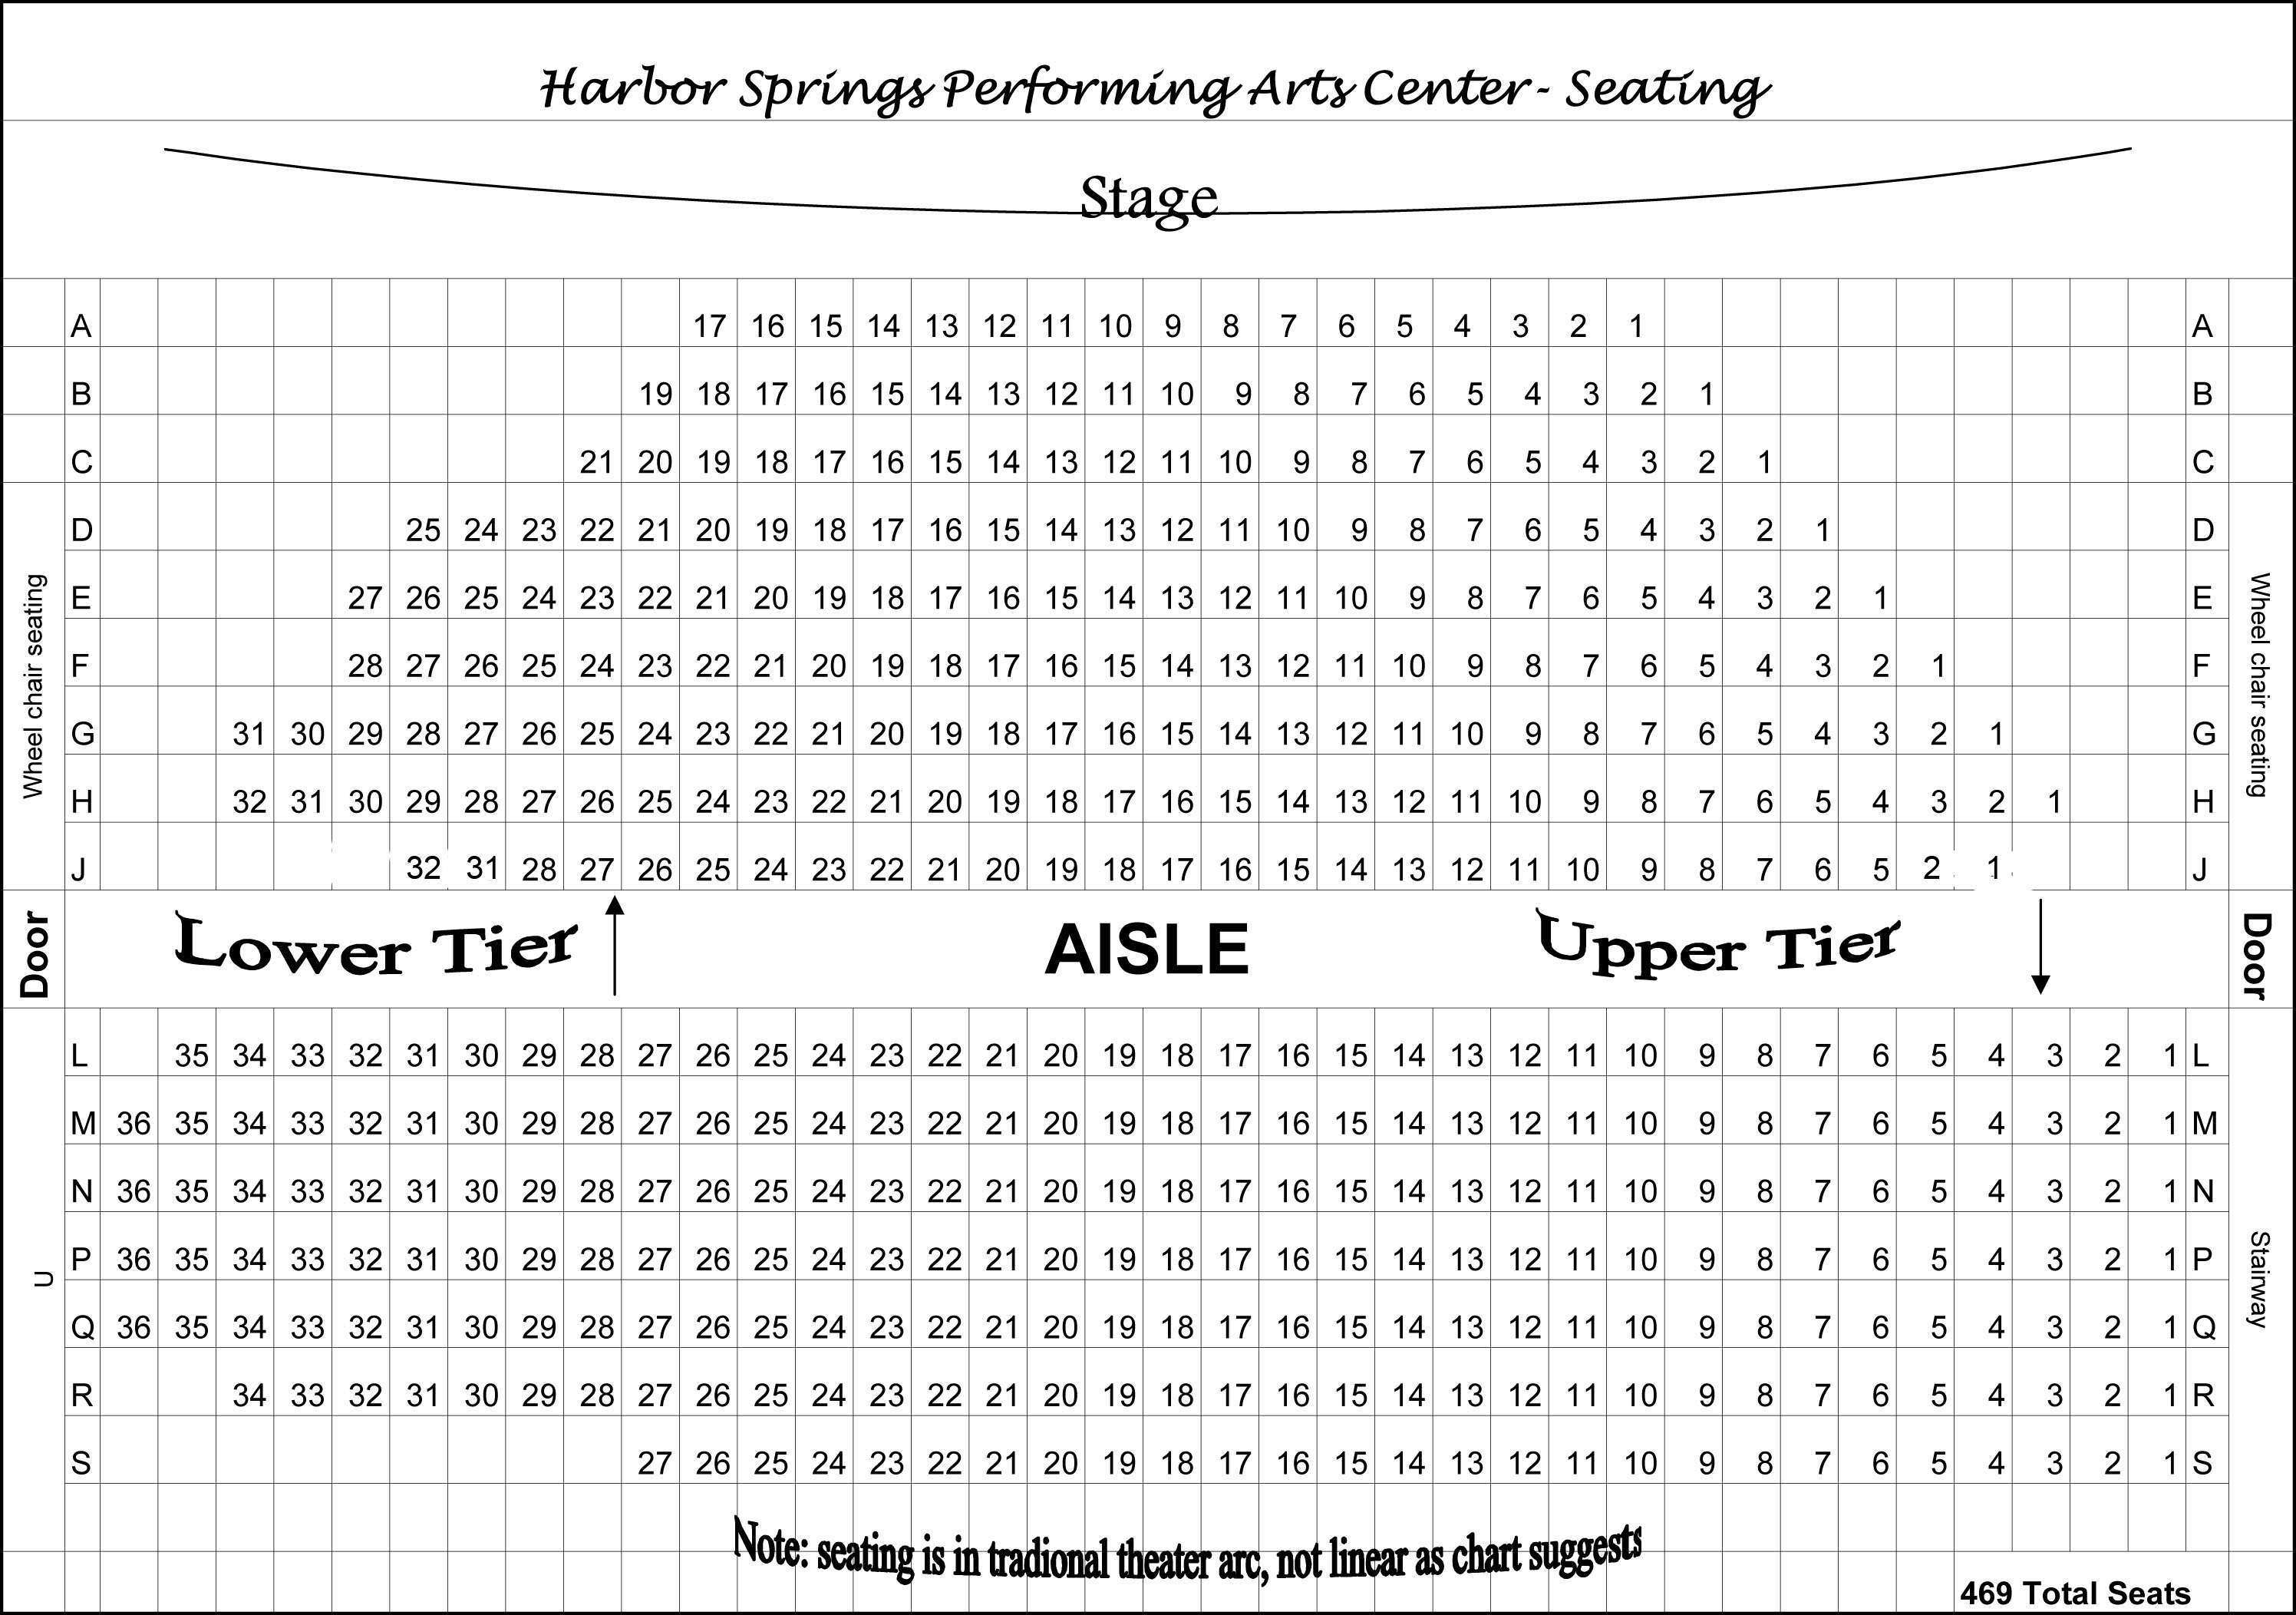 PAC Seating Chart